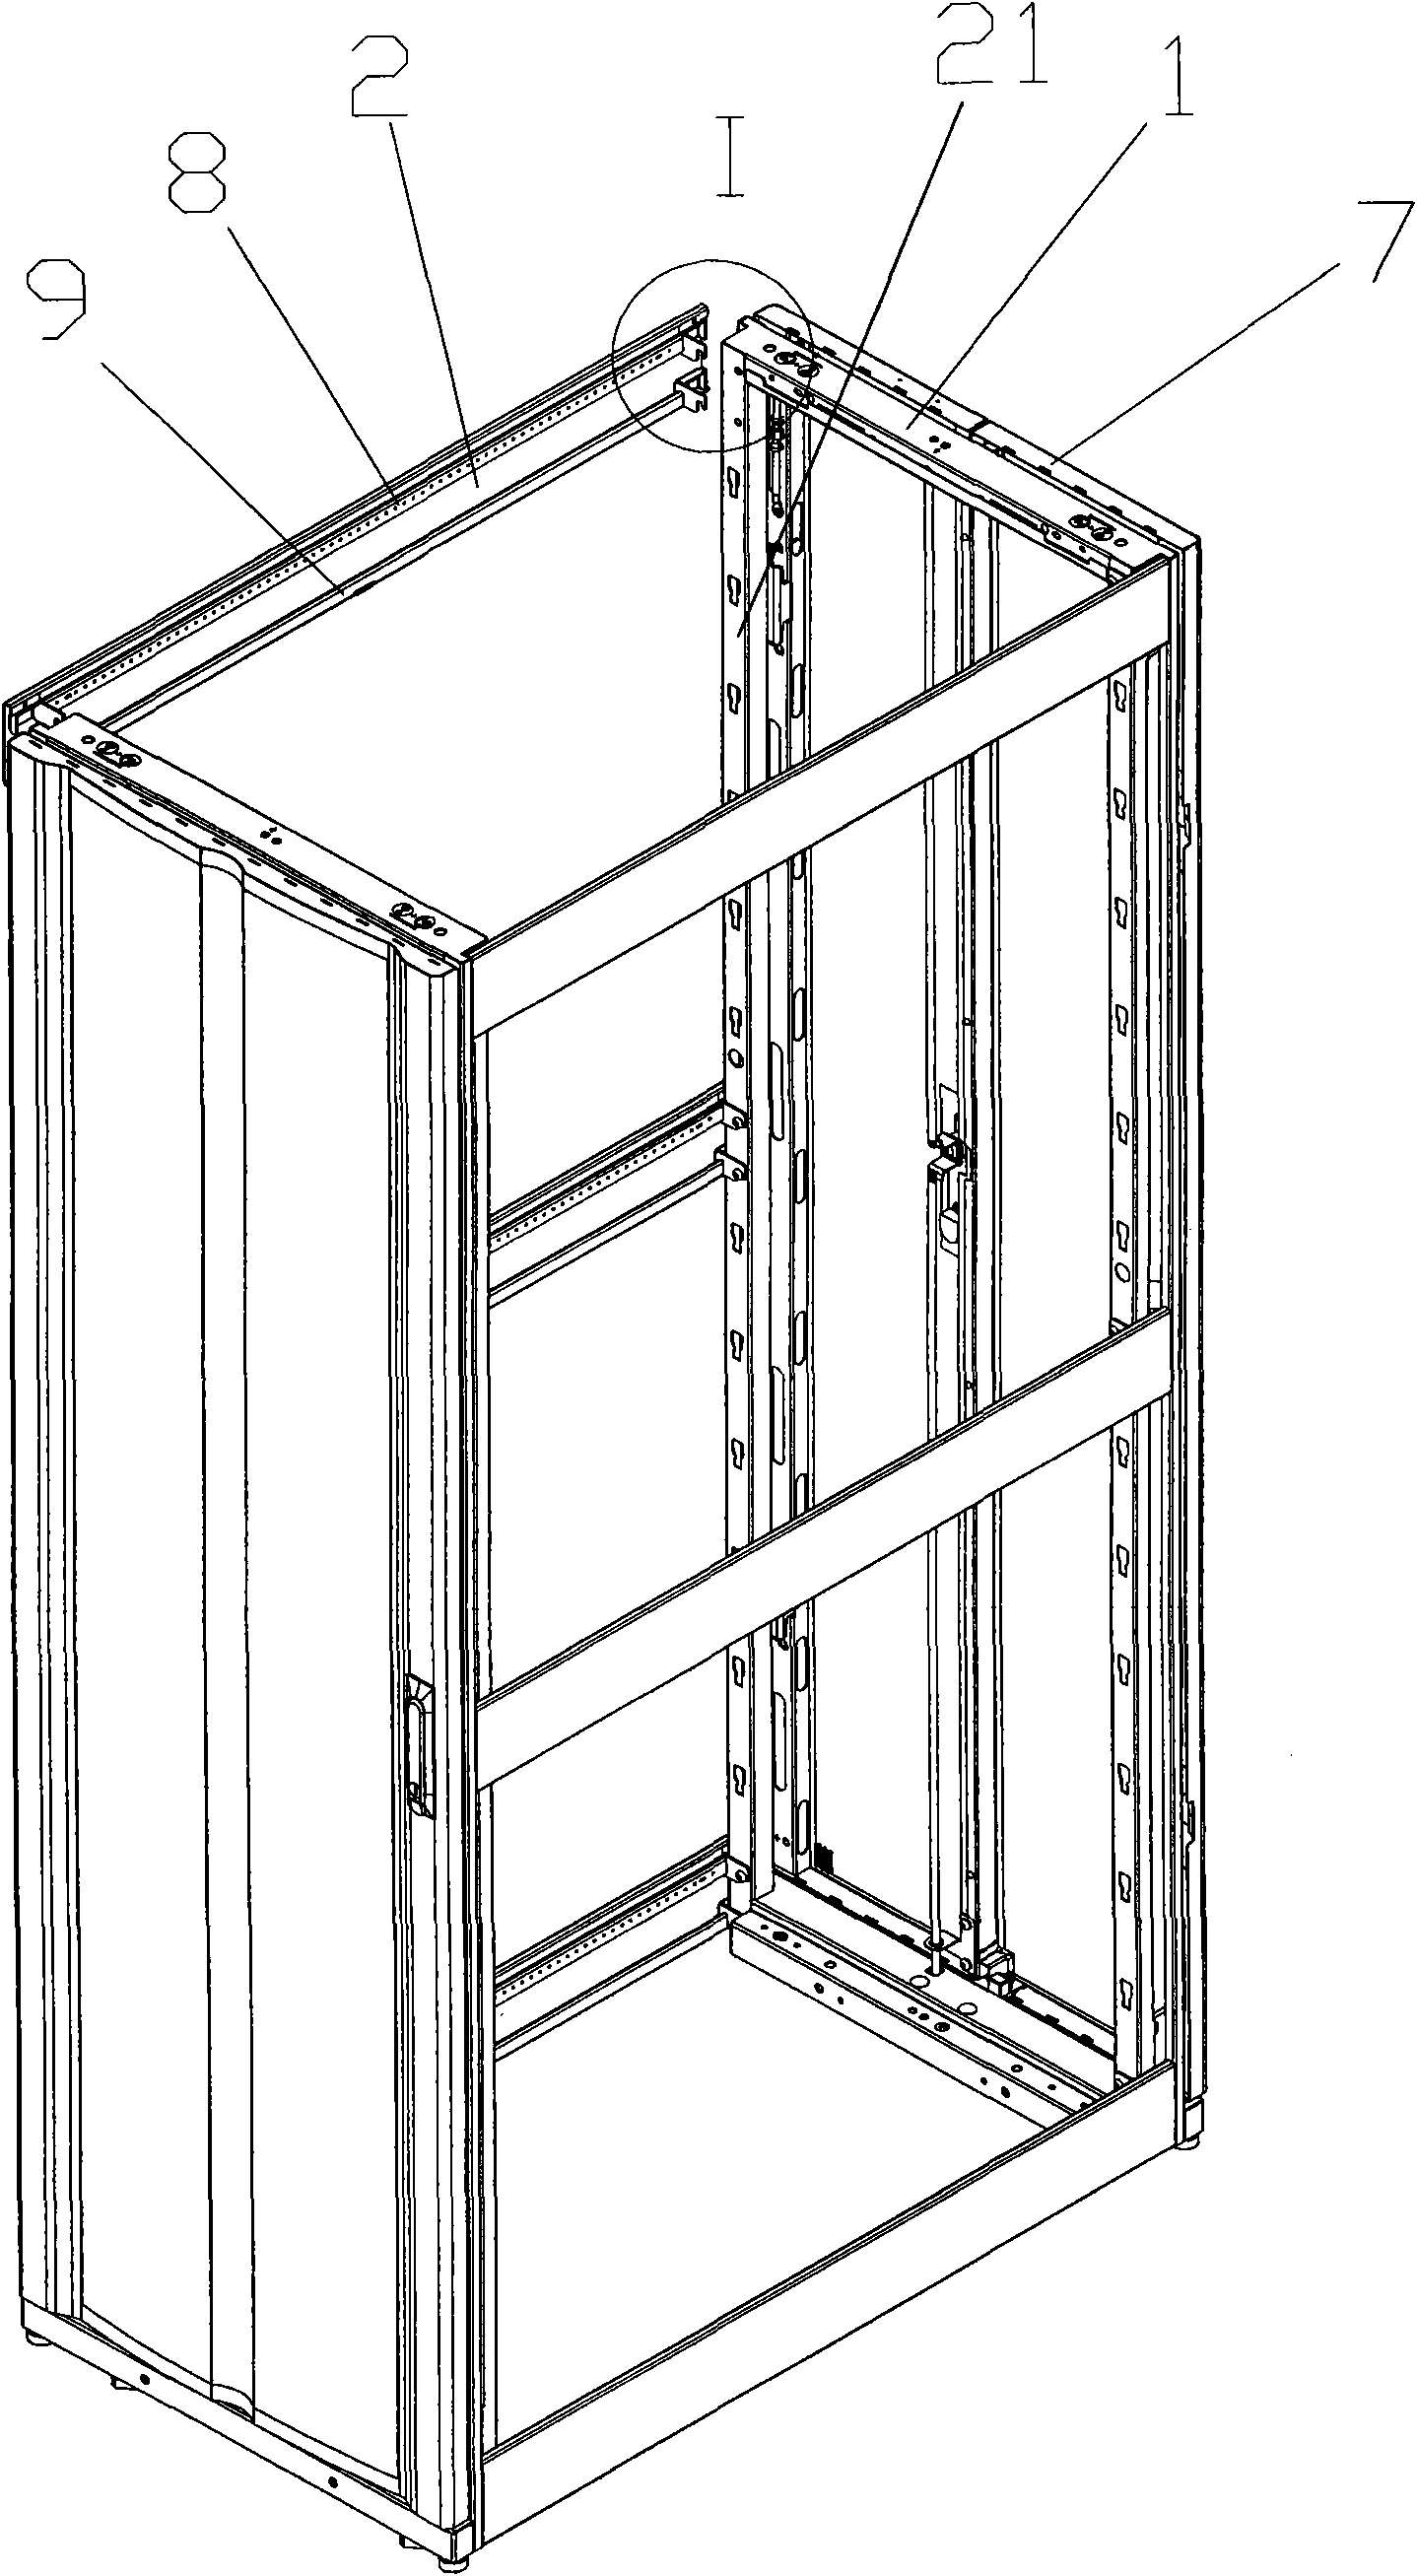 Cabinet for accommodating electric element